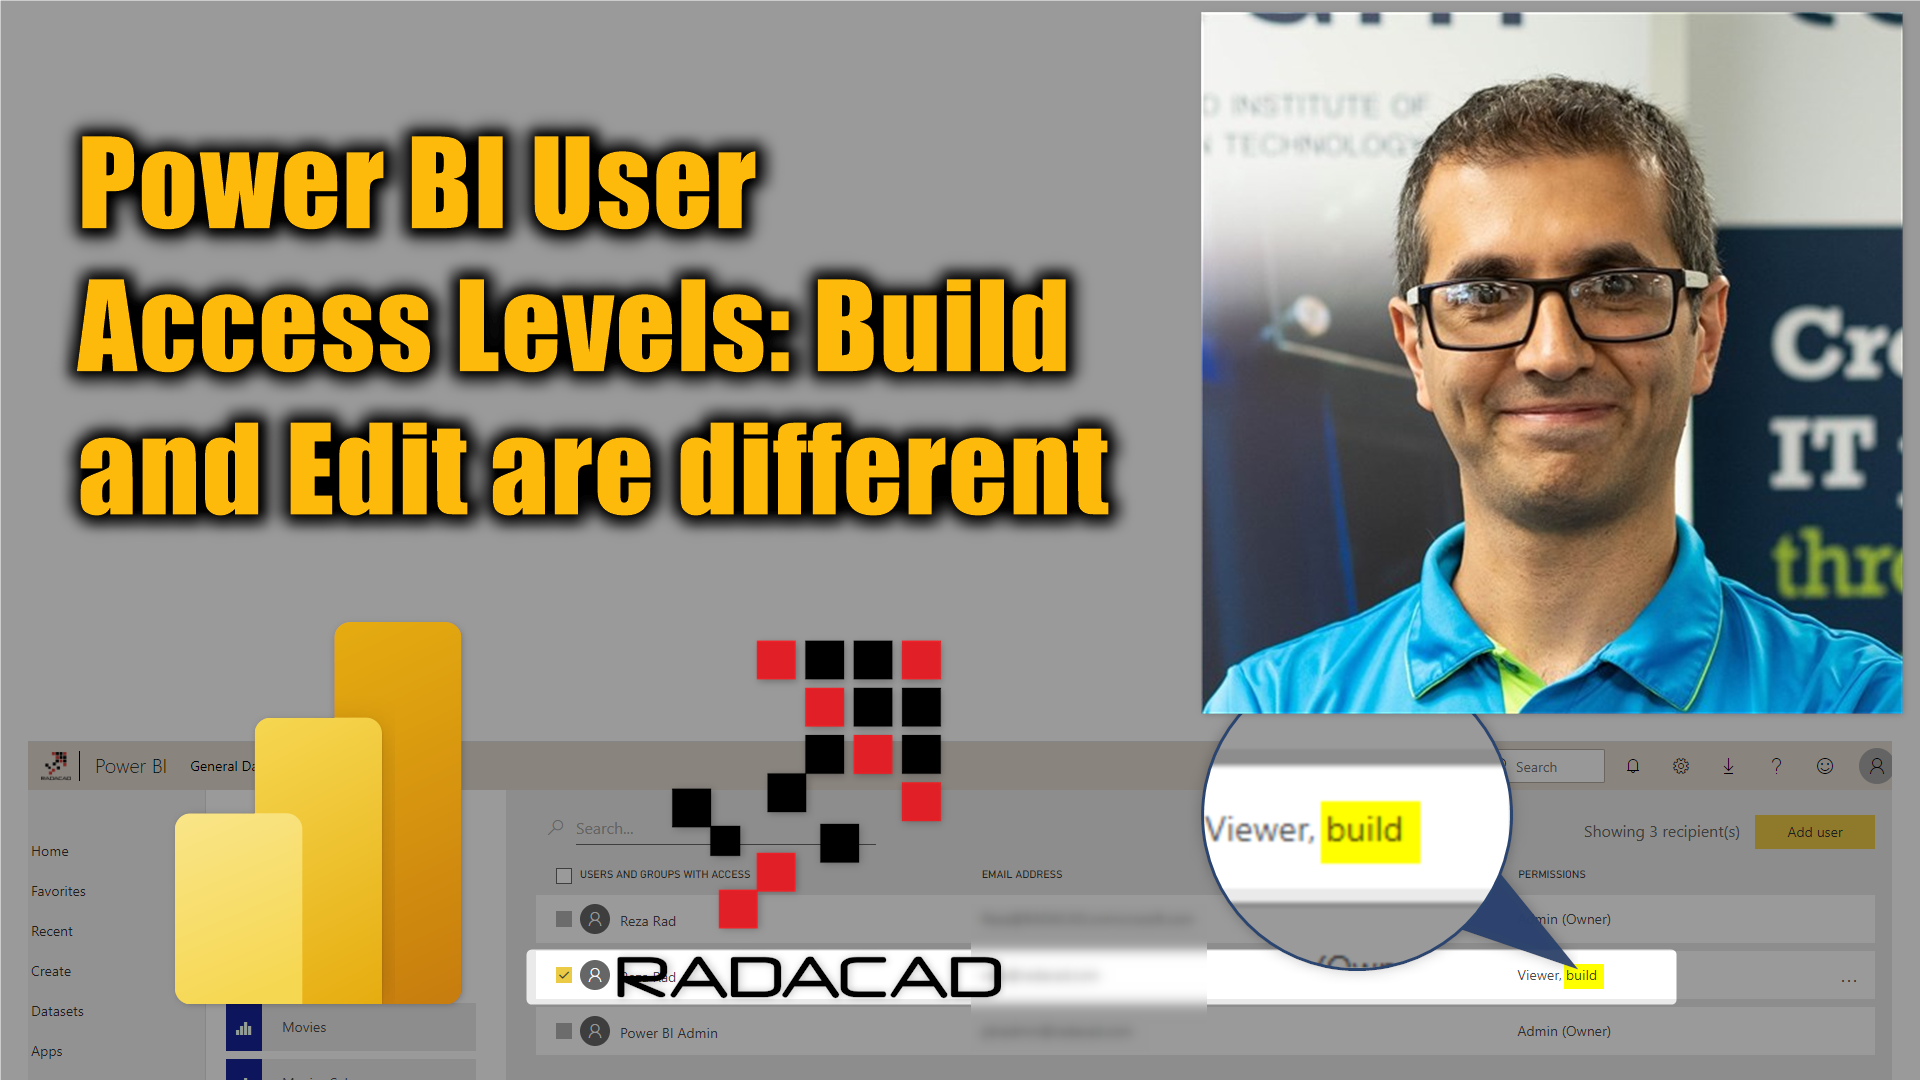 Power BI User Access Levels: Build and Edit are different